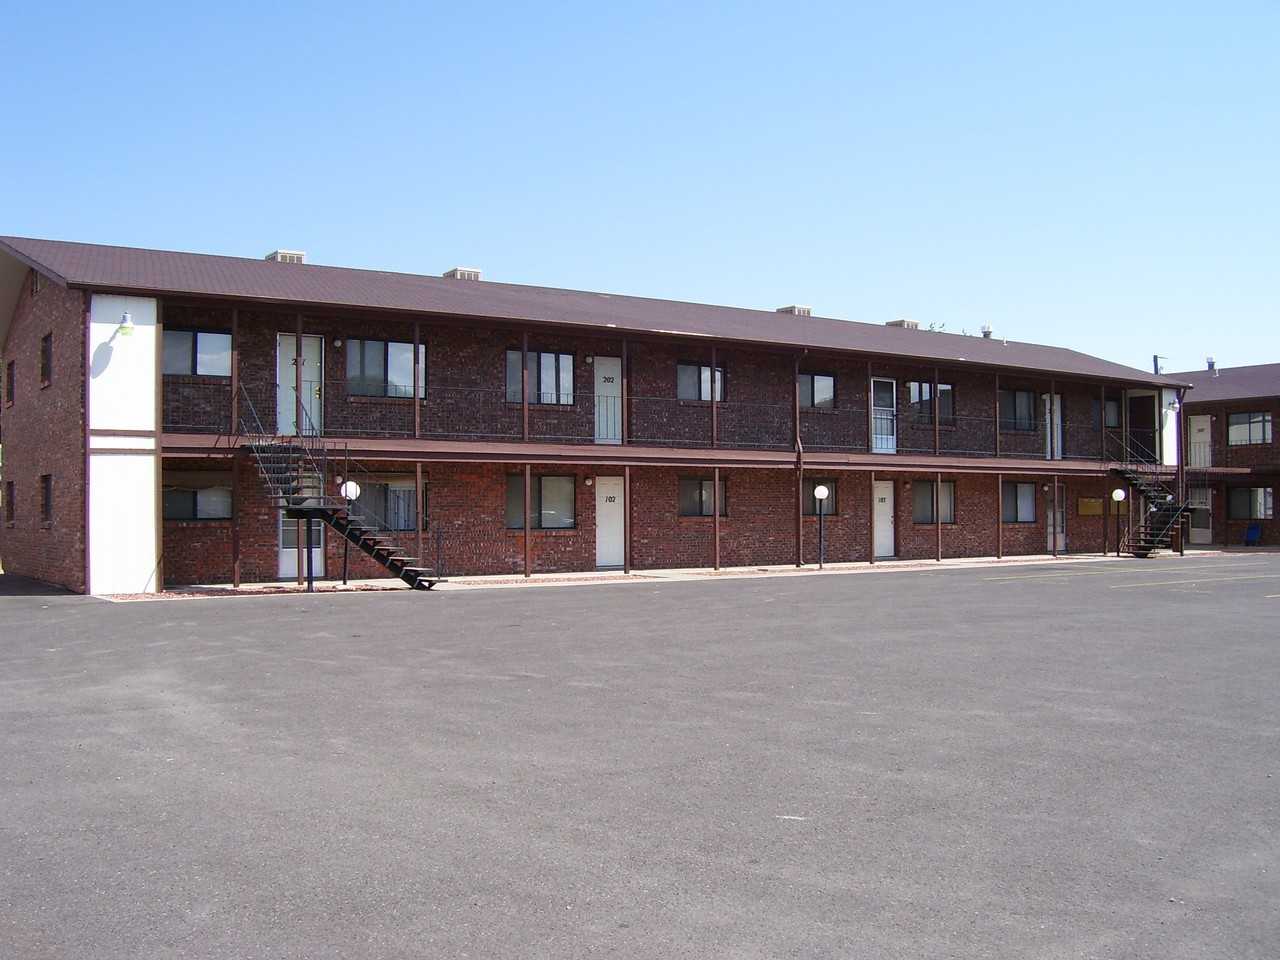 560 29 1/2 Rd Apartments for Rent in Grand Junction, CO